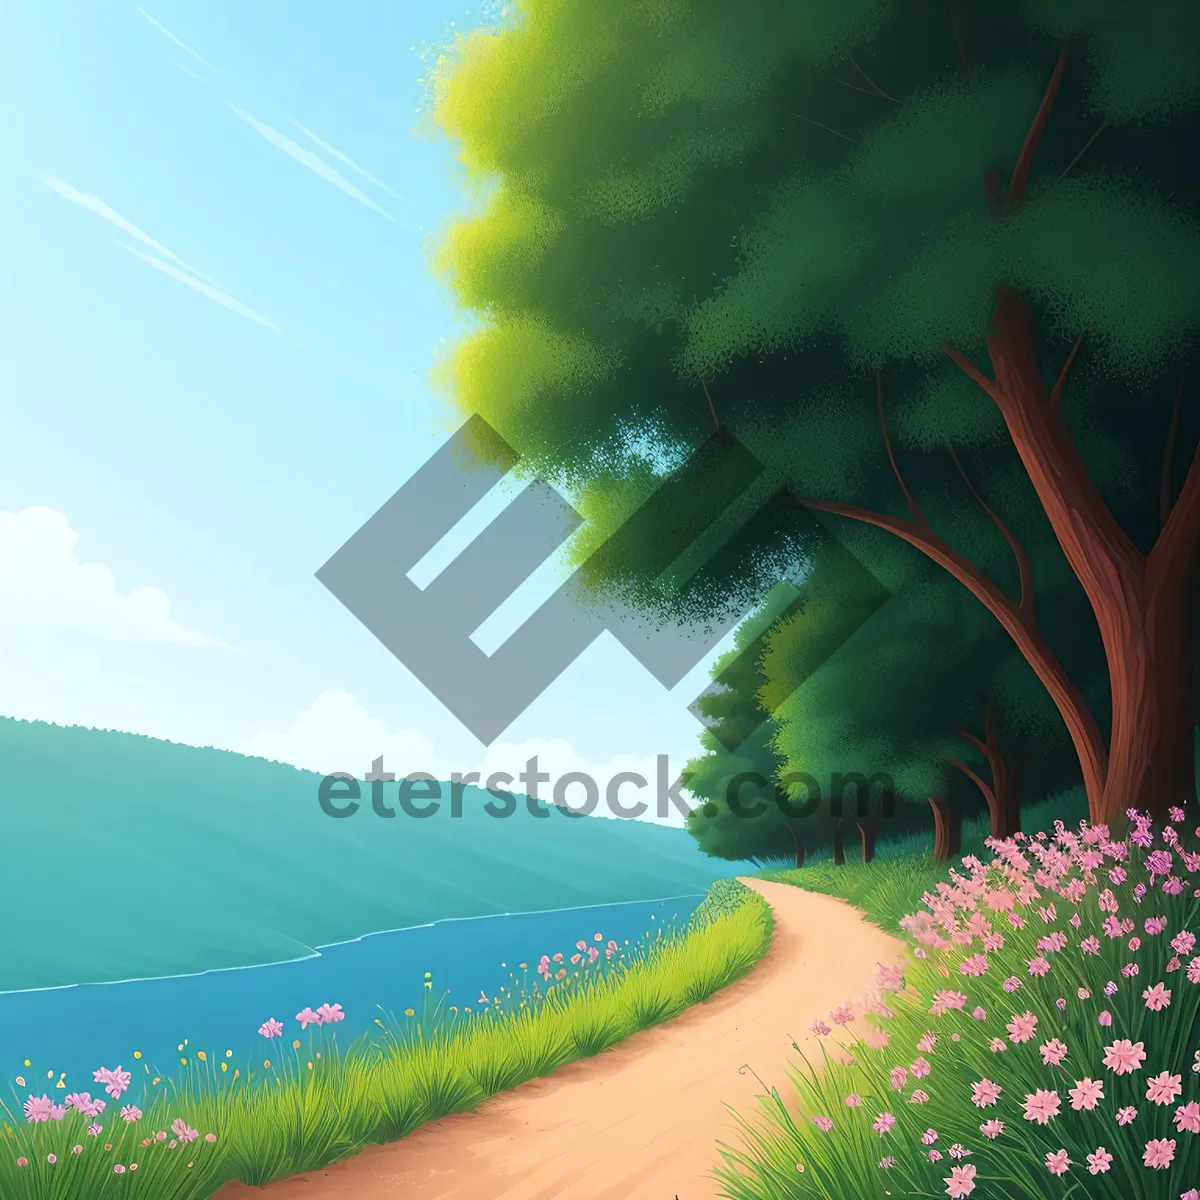 Picture of Serene Countryside: A Colorful Summer Meadow